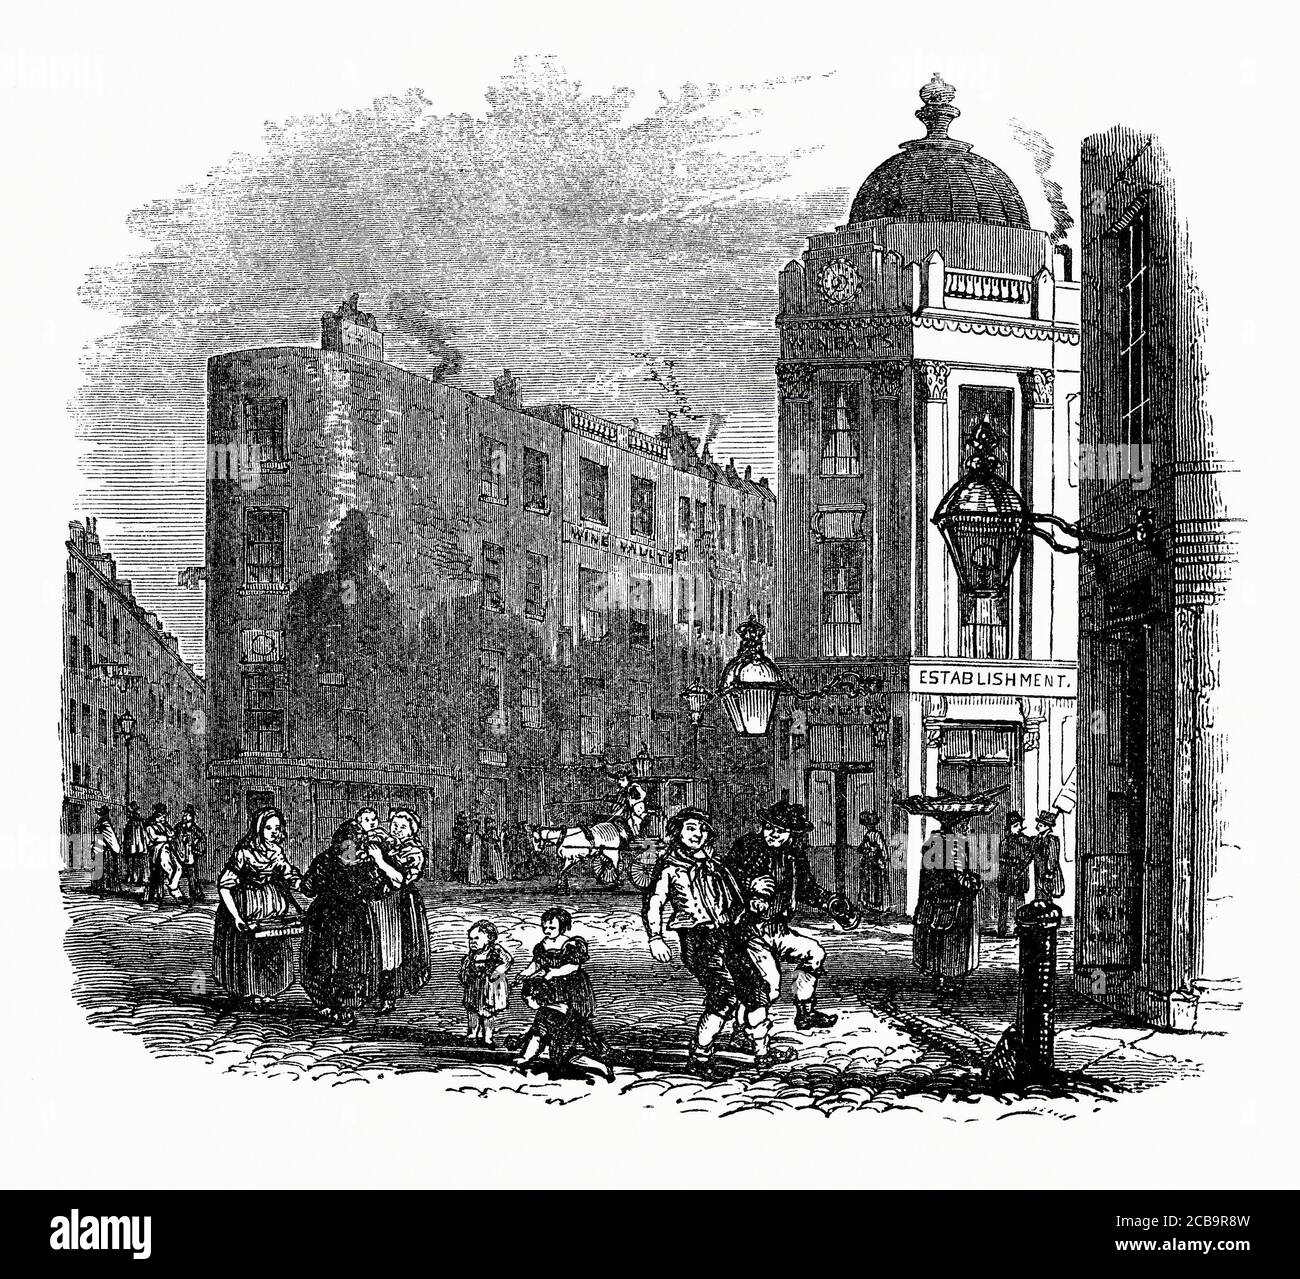 An old engraving of people out and about at Seven Dials, Camden, London, England, UK during the Victorian era. Seven Dials is a road junction (and area). Seven streets converge at circular junction, at the centre of which is a column bearing six sundials. Thomas Neale designed its plan in the 1690s. He hoped that Seven Dials would be popular with wealthy residents but the area gradually deteriorated. In the 1800s Seven Dials was among the worst slums in London. However, today buildings have been restored and Seven Dials is a prosperous district. Stock Photo